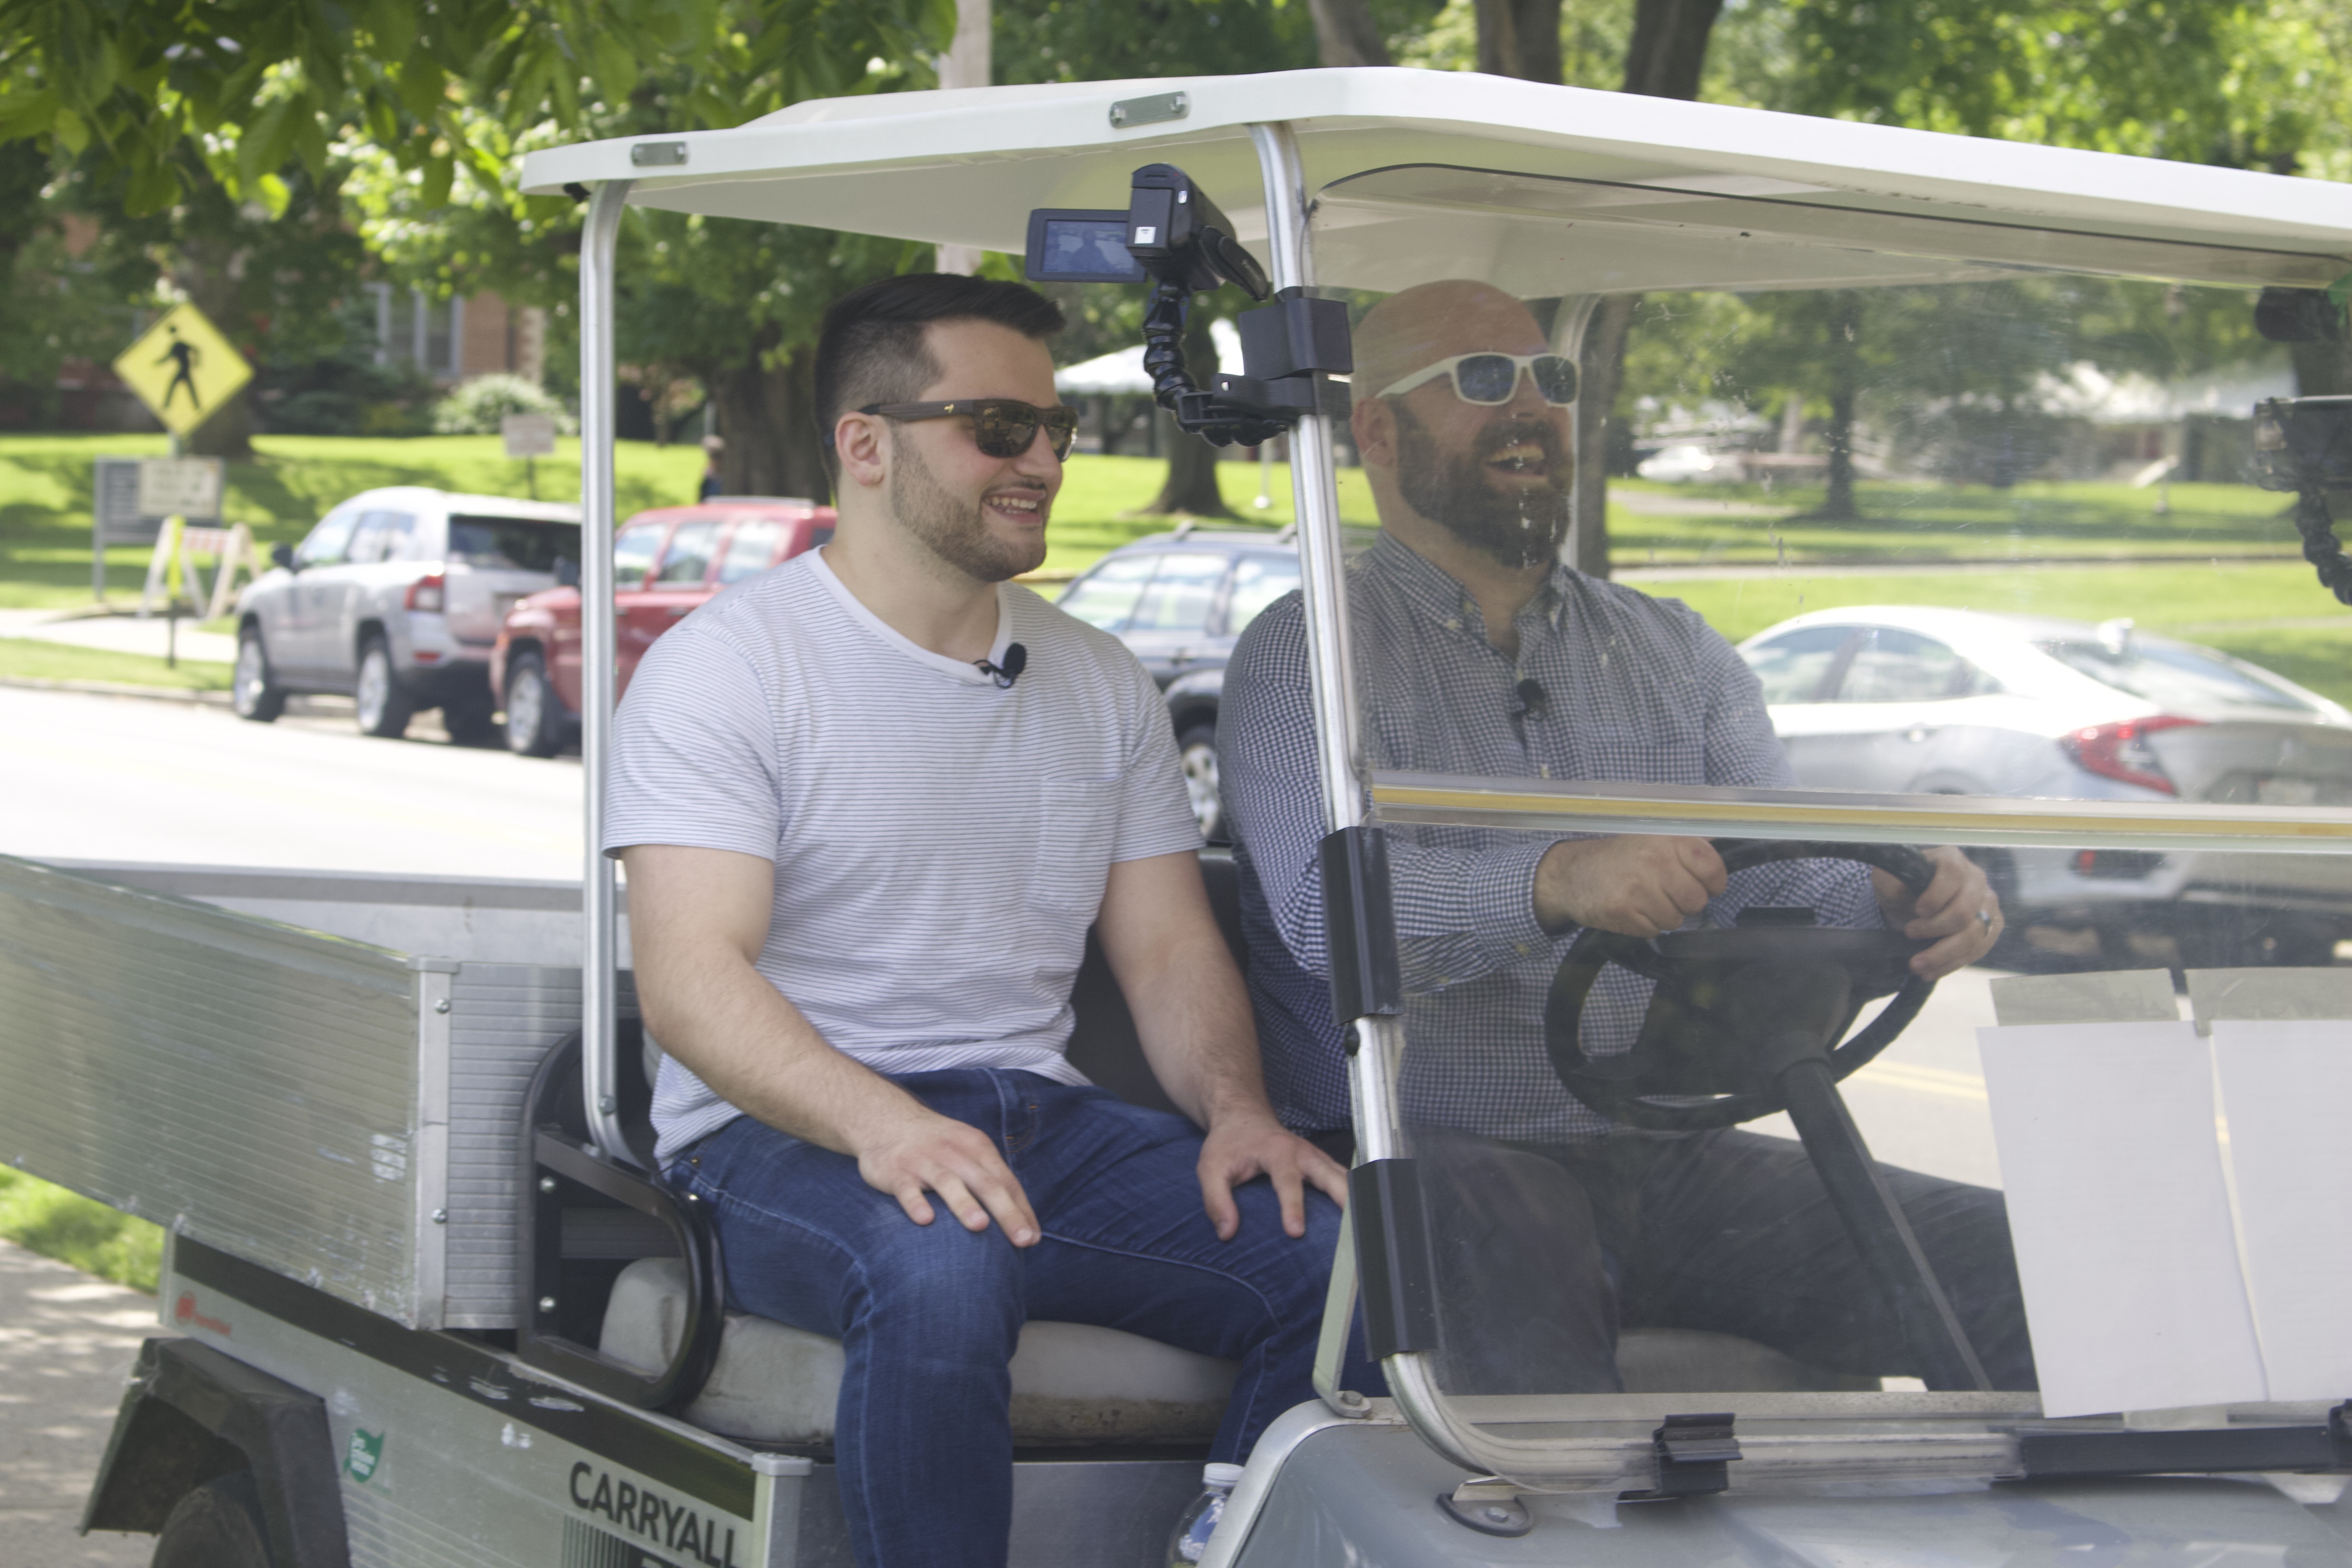 Image for Anthony and Tony talk and travel around campus in a golf cart in this image from the filming of episode 2.